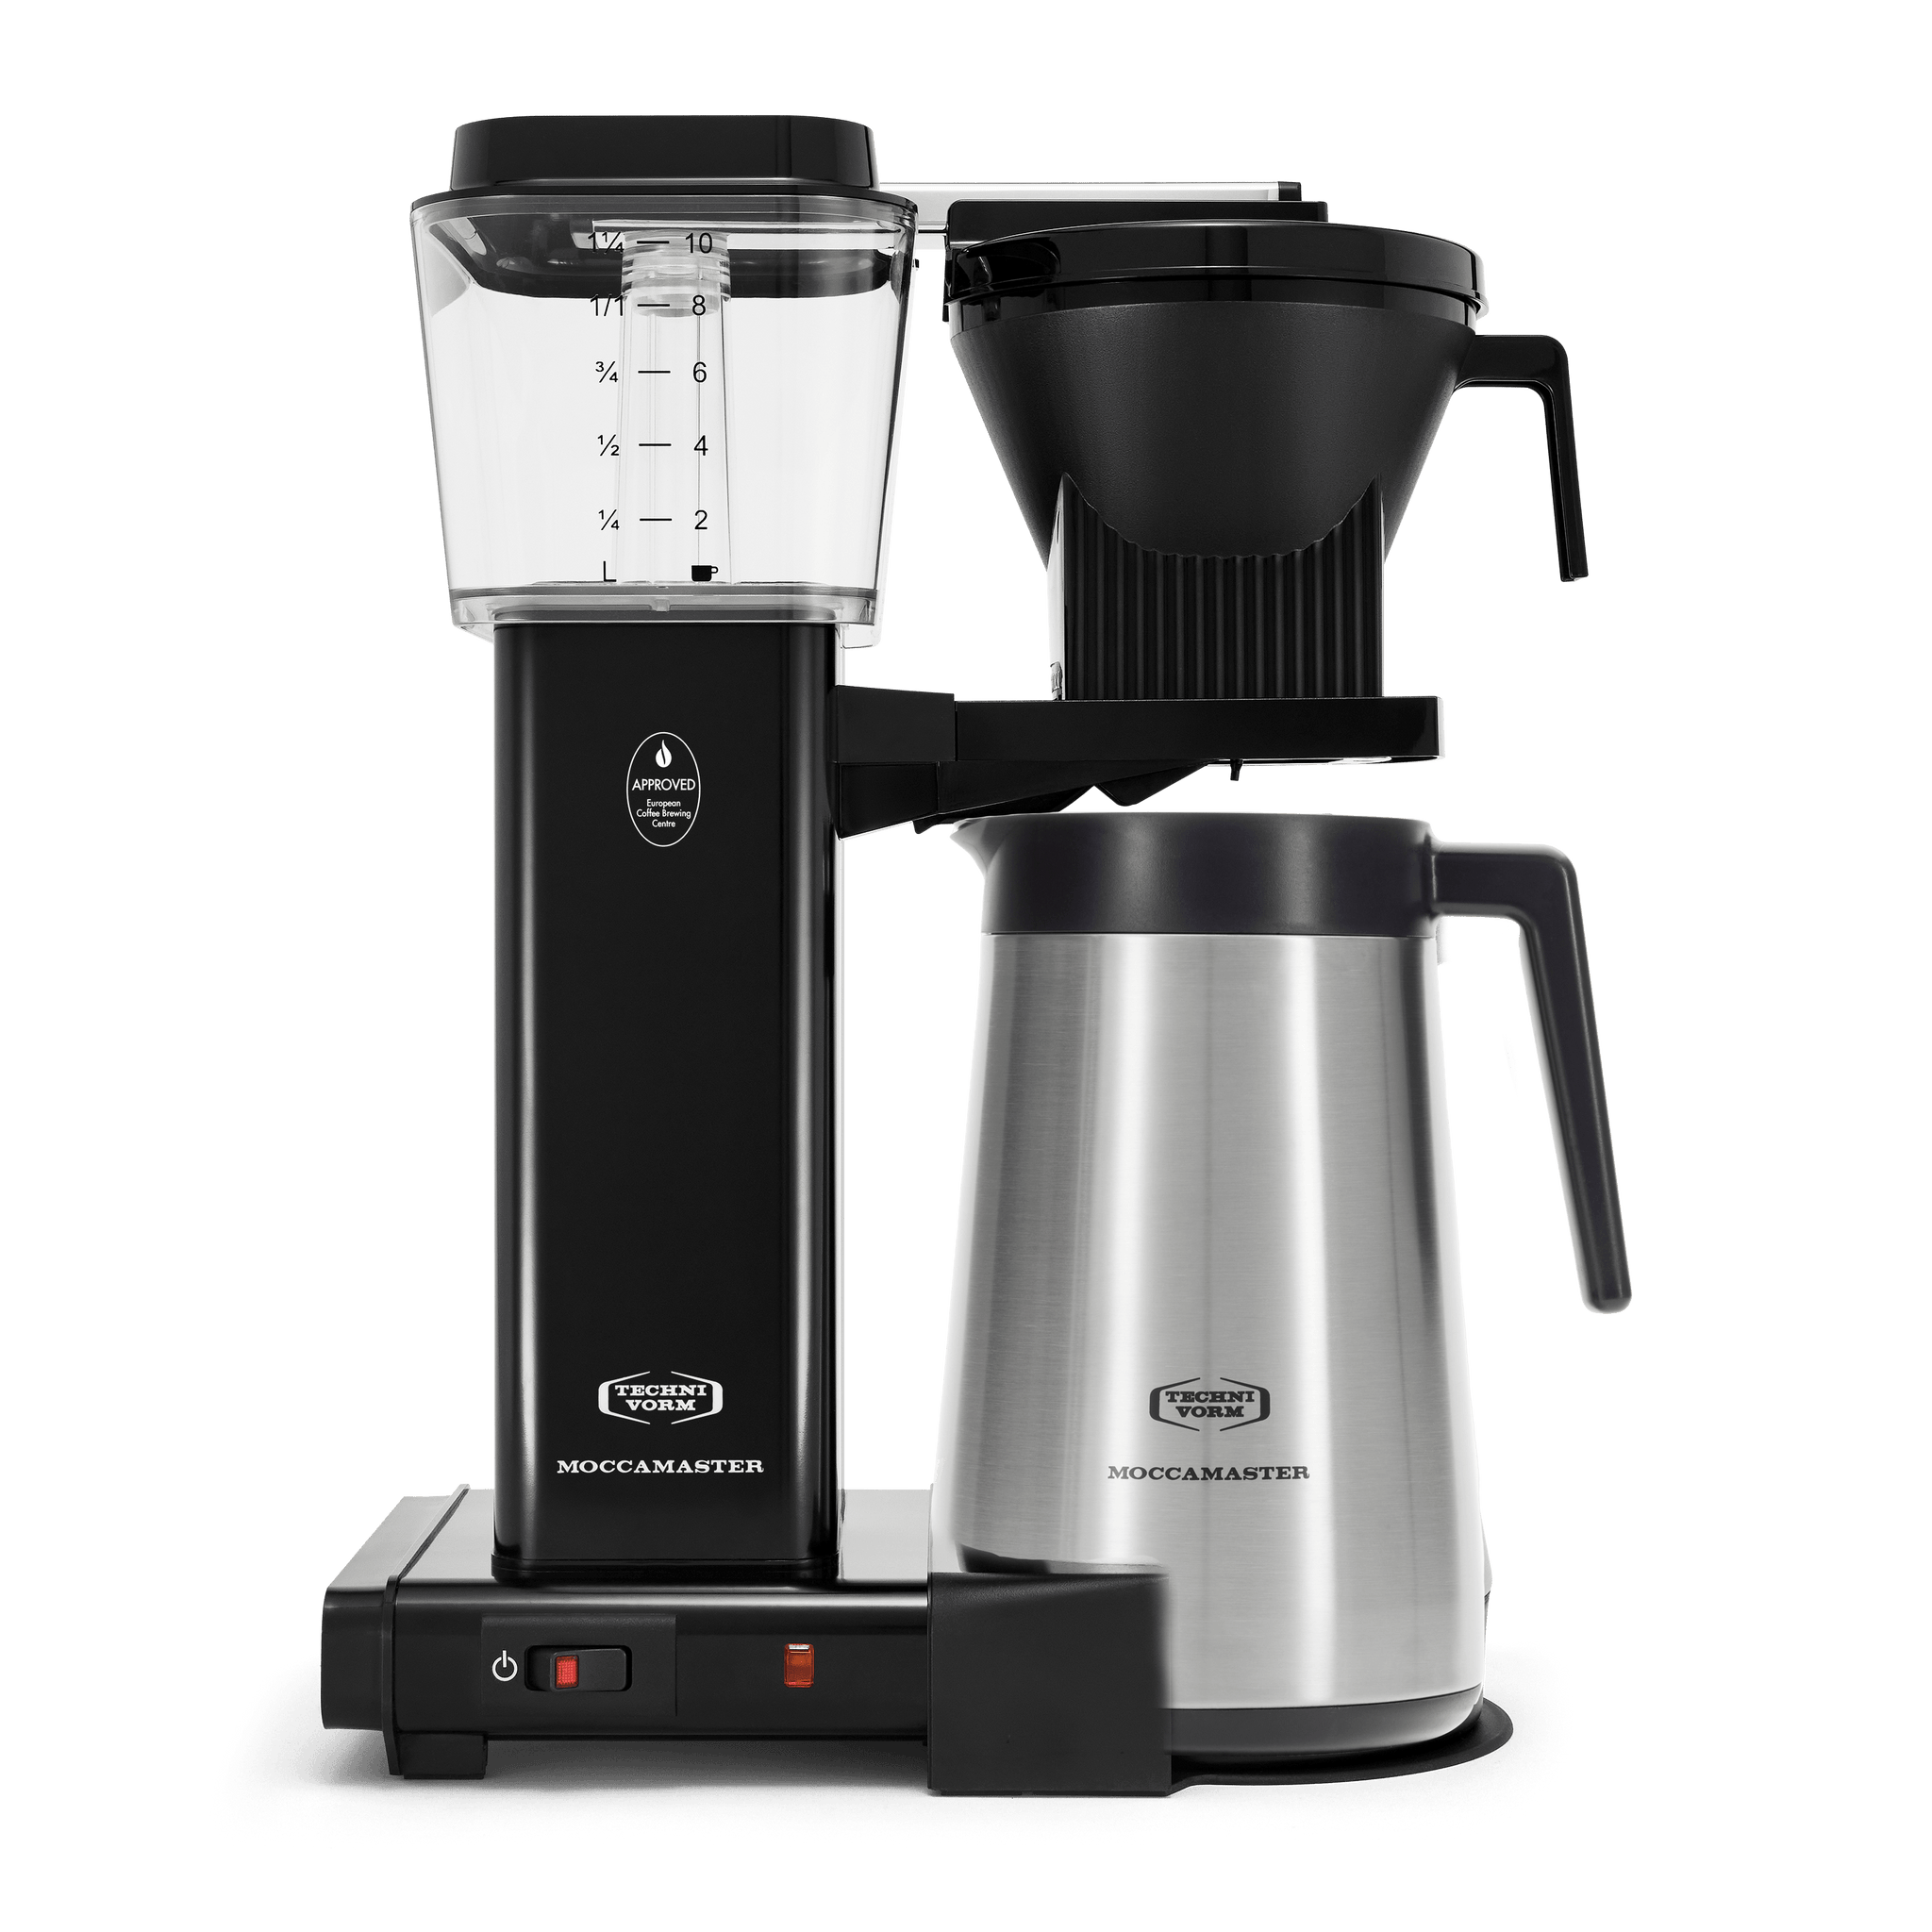 Brewer Moccamaster Coffee Pour Maker: Over KBGT USA Moccamaster - Drip-Stop Automatic